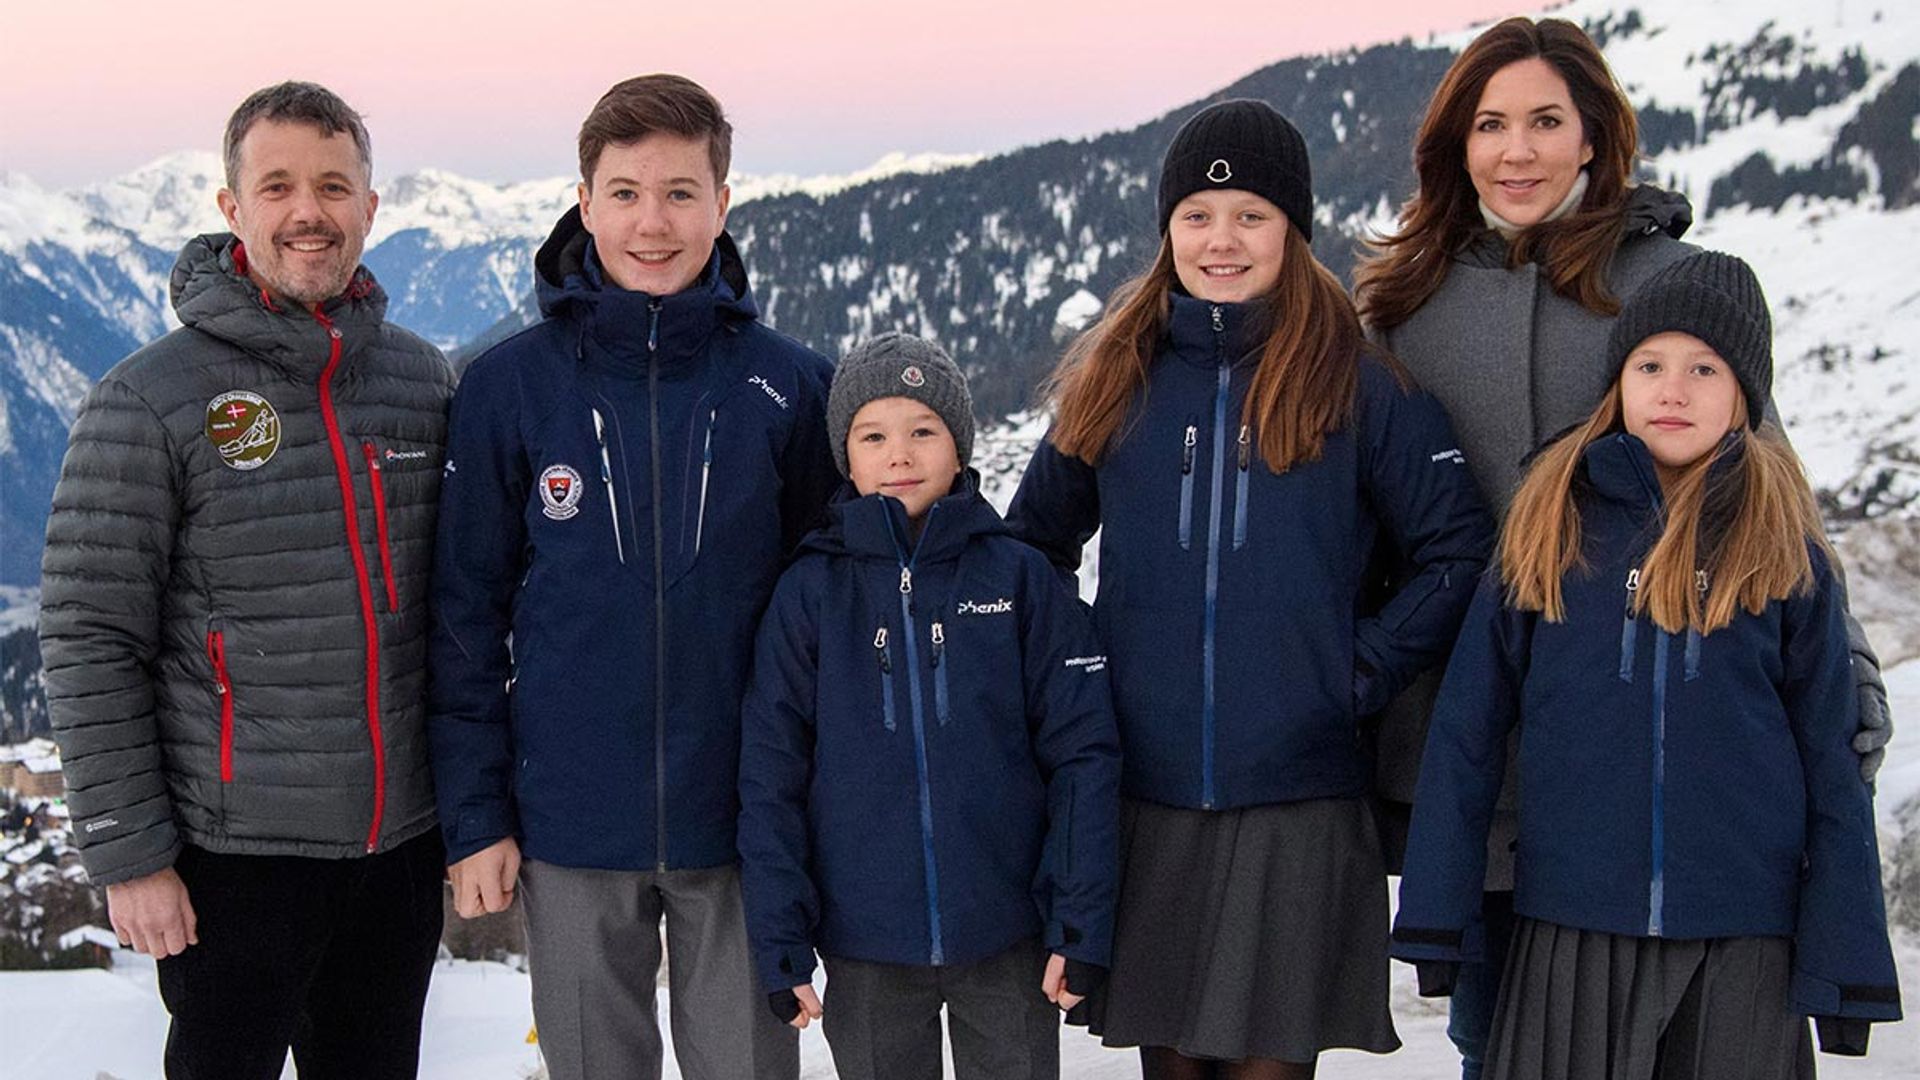 Crown Prince Frederik and Crown Princess Mary's son Prince Christian tests positive for COVID-19